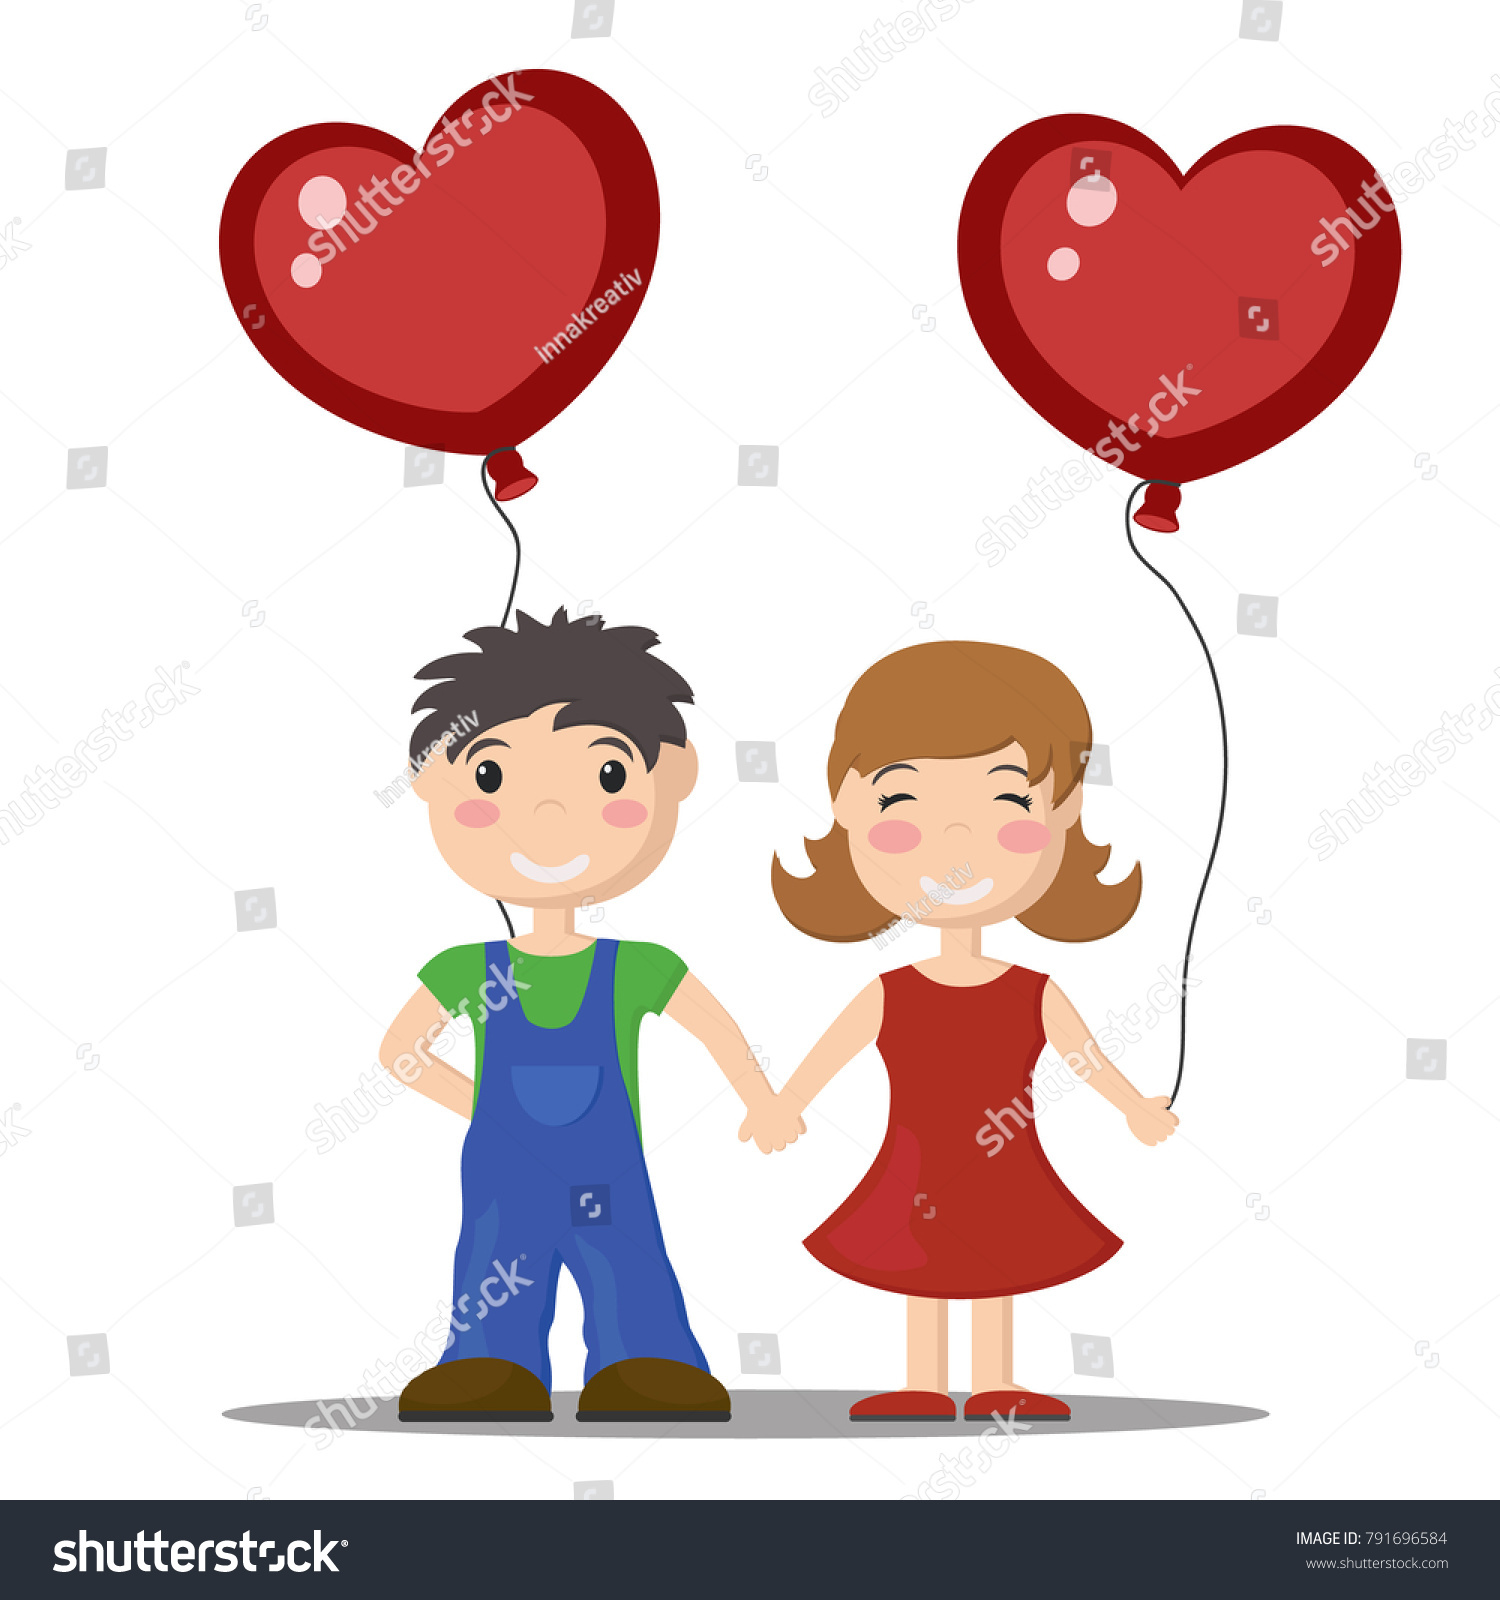 Boy Girl Holding Hands Holding Balloons Stock Vector (Royalty Free ...